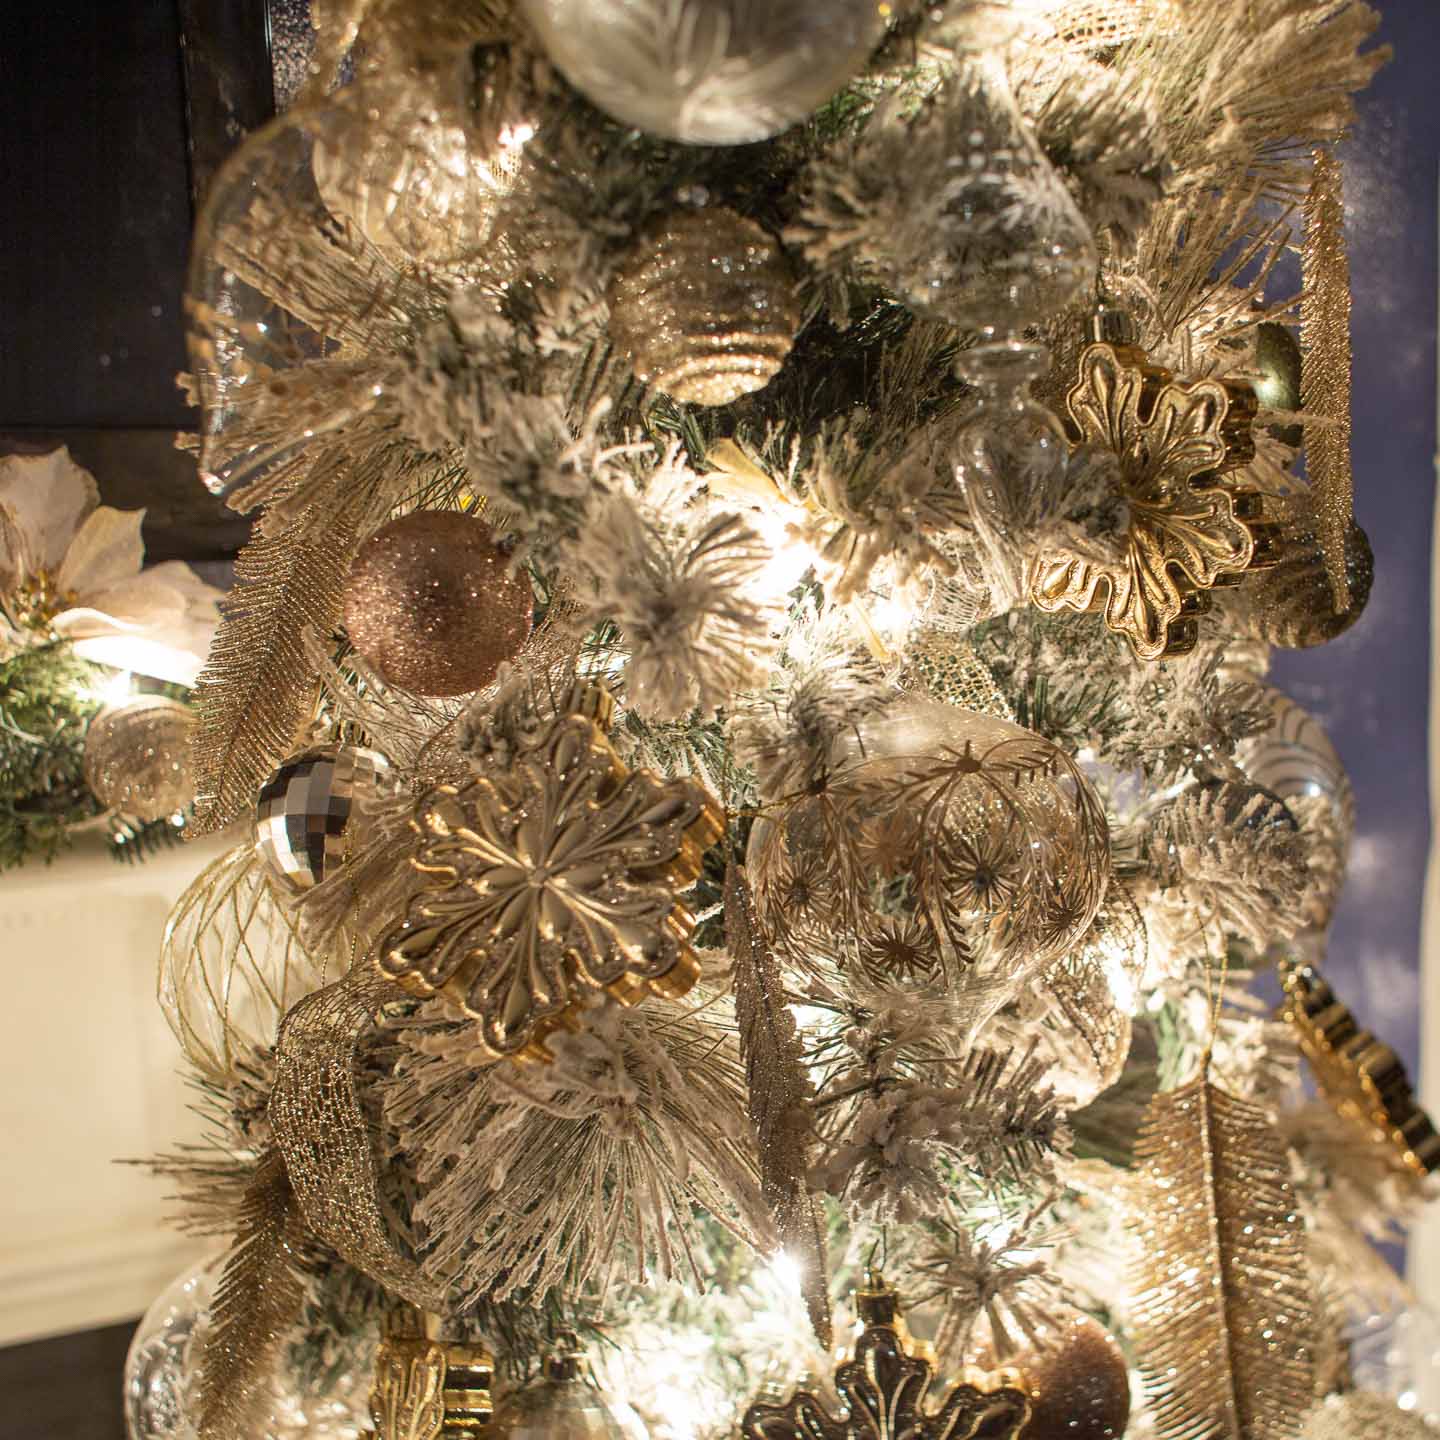 Copper, silver and gold ornaments on a flocked Christmas tree